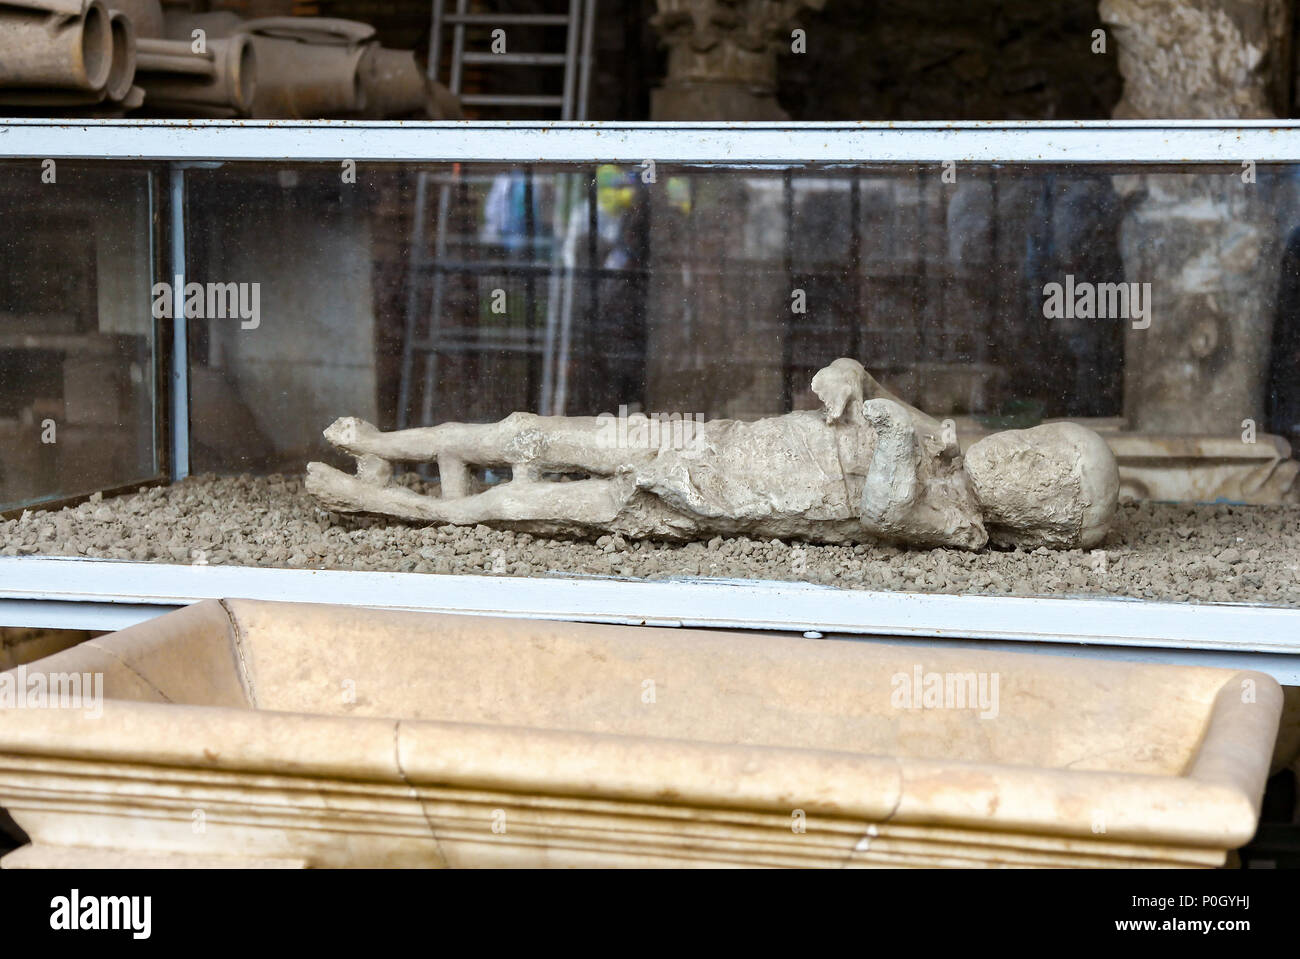 Plaster cast of a small child in a glass case, from the eruption of Vesuvius in AD 79 at the Pompeii Archaeological site, Pompeii, Campania, Italy, Stock Photo